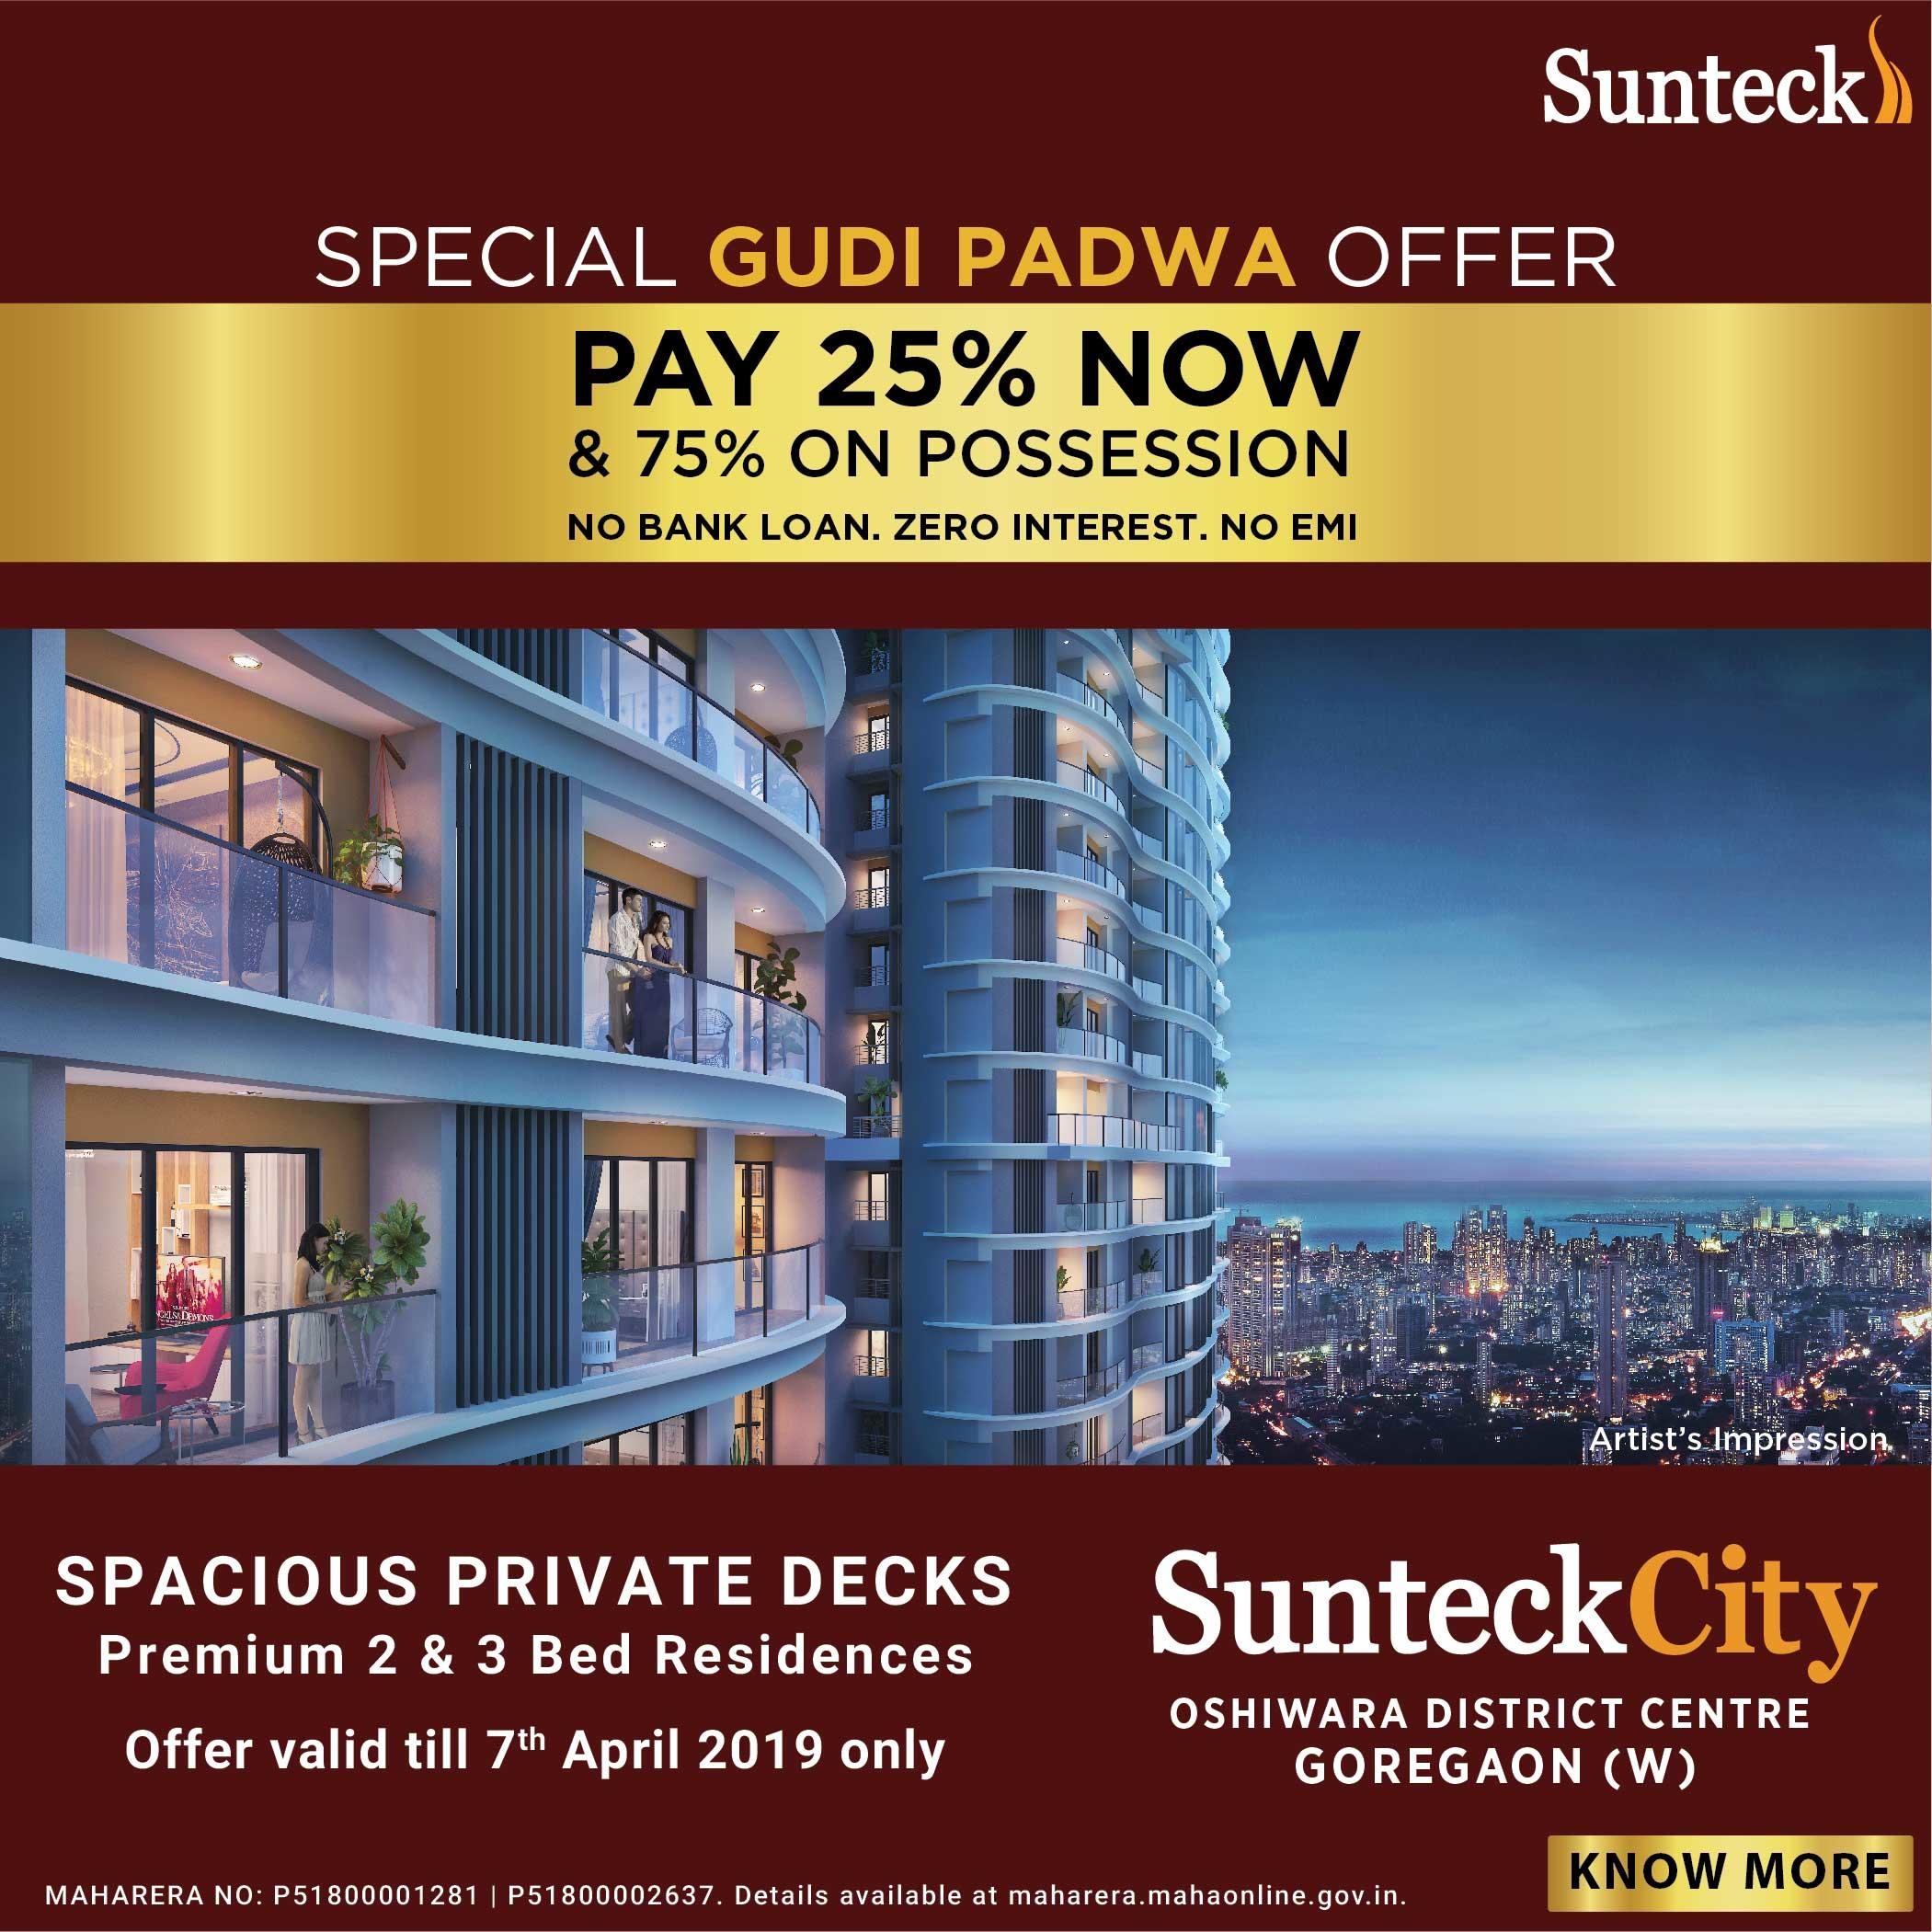 Special Guddi Padwa offer pay 25% now & 75% on possession at Sunteck City in Mumbai